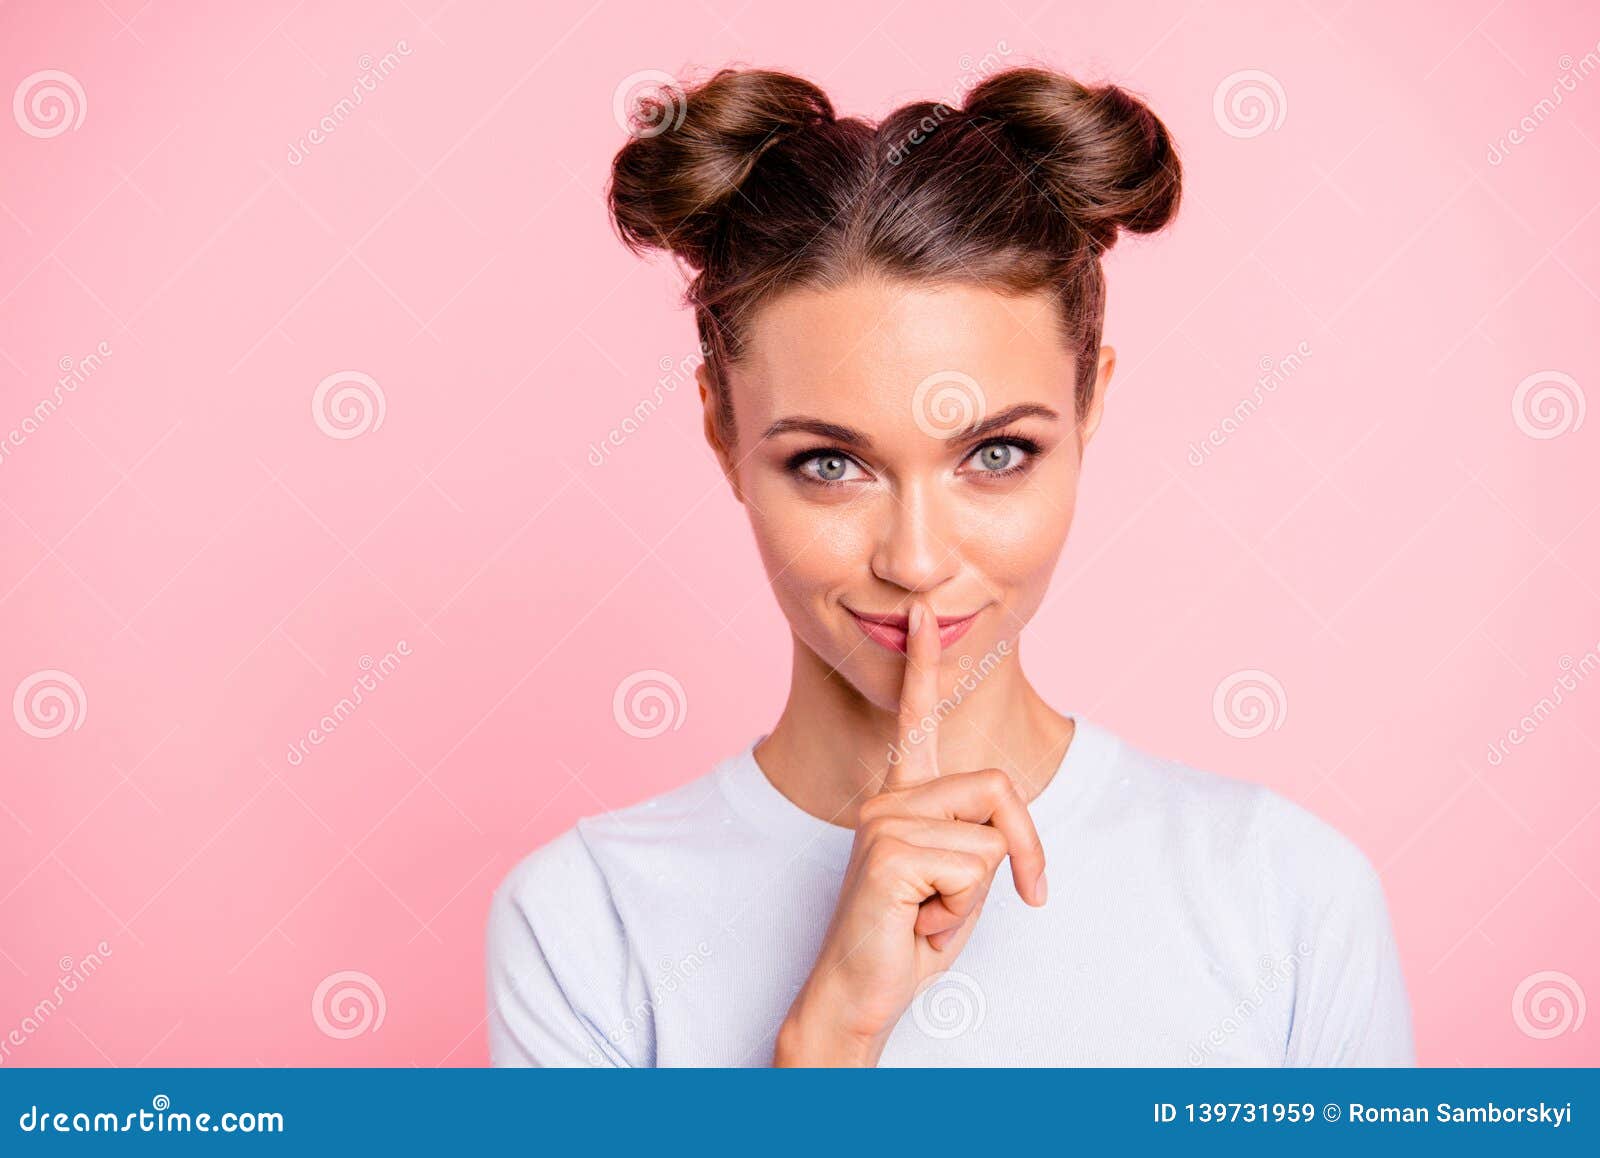 close-up portrait of her she nice cute attractive cheerful girl lady showing shh sign  over pastel pink